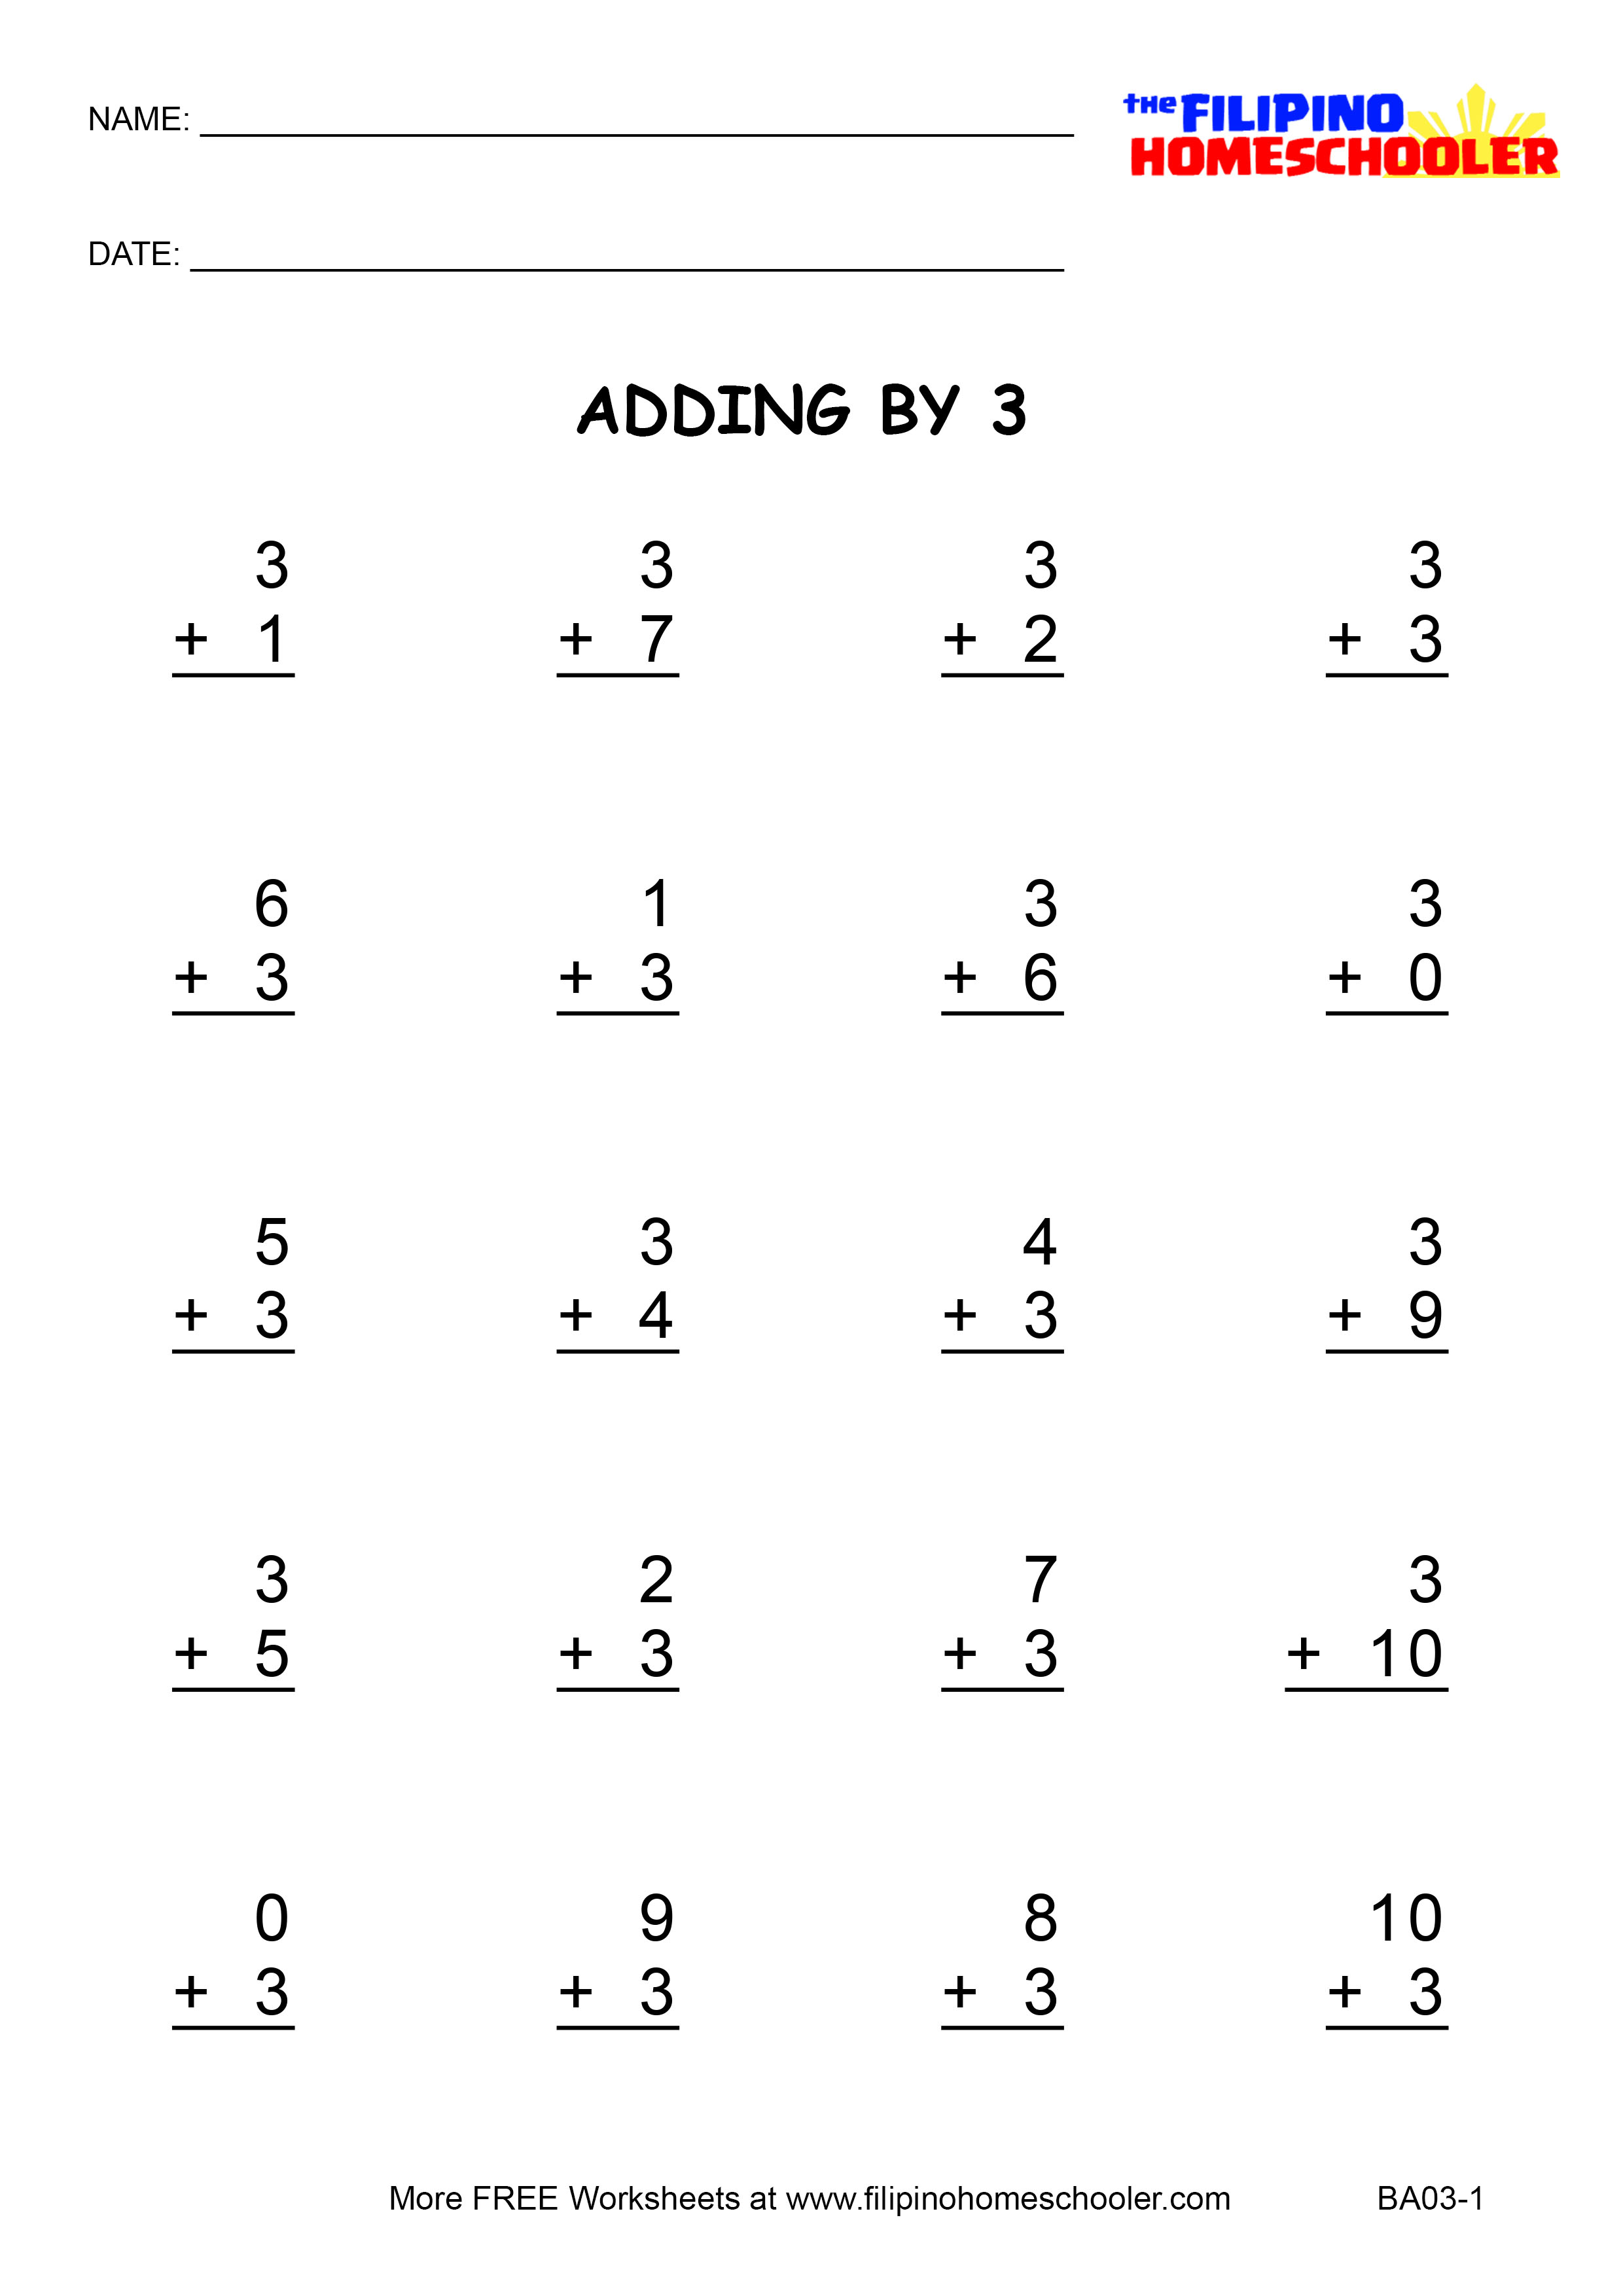 Adding By 3 Worksheets And Teaching Strategies The Filipino Homeschooler Fast math addition worksheets